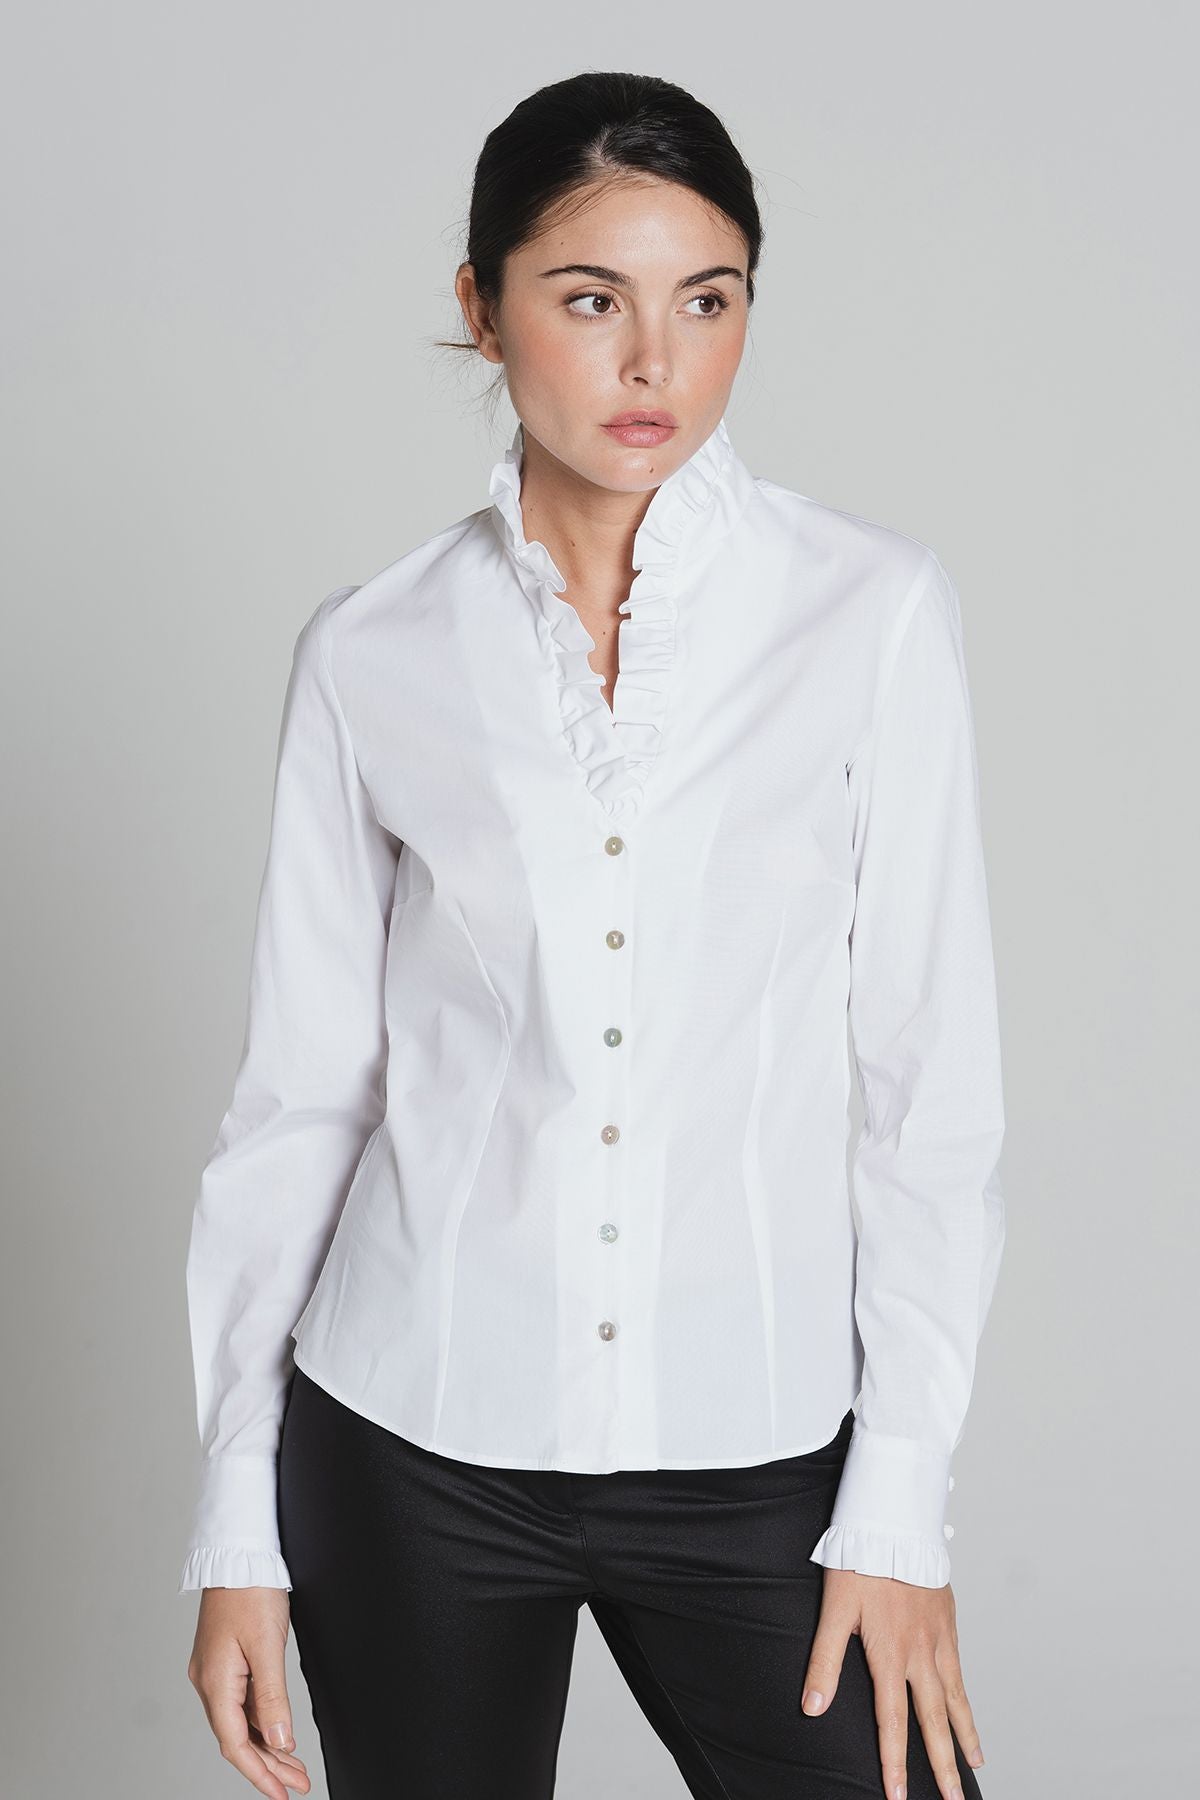 Bariloche Luca Shirt - Only available in Light Blue